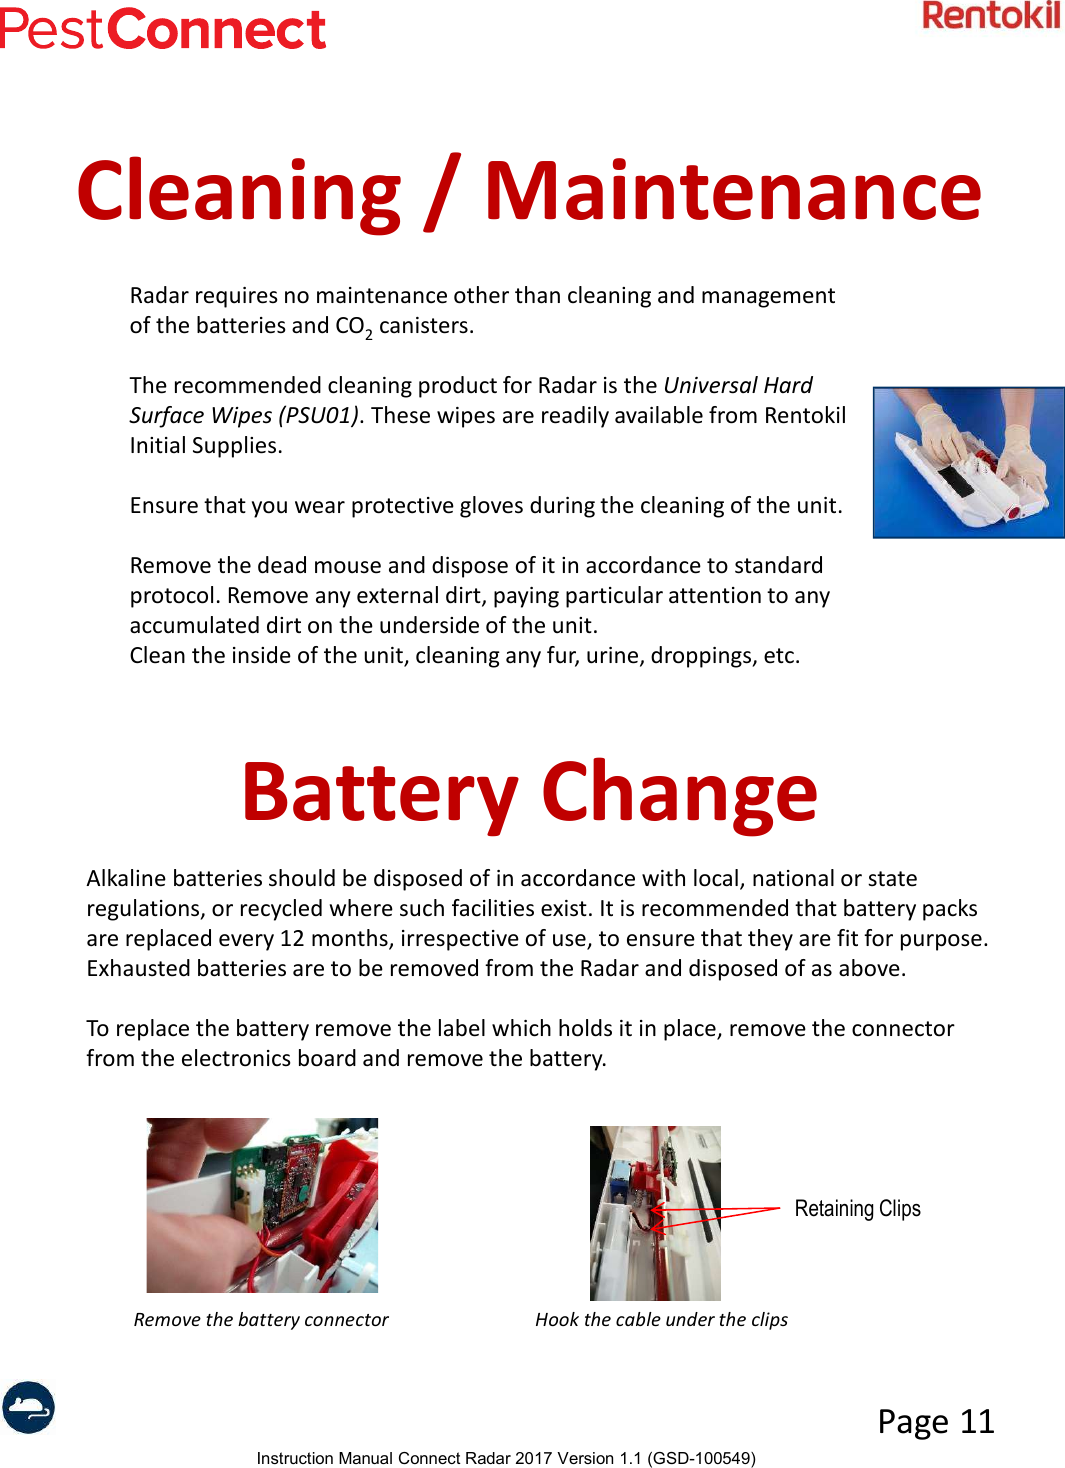 Instruction Manual Connect Radar 2017 Version 1.1 (GSD-100549)Page 11Cleaning / MaintenanceRadar requires no maintenance other than cleaning and management of the batteries and CO2canisters. The recommended cleaning product for Radar is the Universal Hard Surface Wipes (PSU01). These wipes are readily available from Rentokil Initial Supplies.   Ensure that you wear protective gloves during the cleaning of the unit.Remove the dead mouse and dispose of it in accordance to standard protocol. Remove any external dirt, paying particular attention to any accumulated dirt on the underside of the unit.Clean the inside of the unit, cleaning any fur, urine, droppings, etc. Battery ChangeAlkaline batteries should be disposed of in accordance with local, national or state regulations, or recycled where such facilities exist. It is recommended that battery packs are replaced every 12 months, irrespective of use, to ensure that they are fit for purpose. Exhausted batteries are to be removed from the Radar and disposed of as above.To replace the battery remove the label which holds it in place, remove the connector from the electronics board and remove the battery.Remove the battery connector Hook the cable under the clipsRetaining Clips